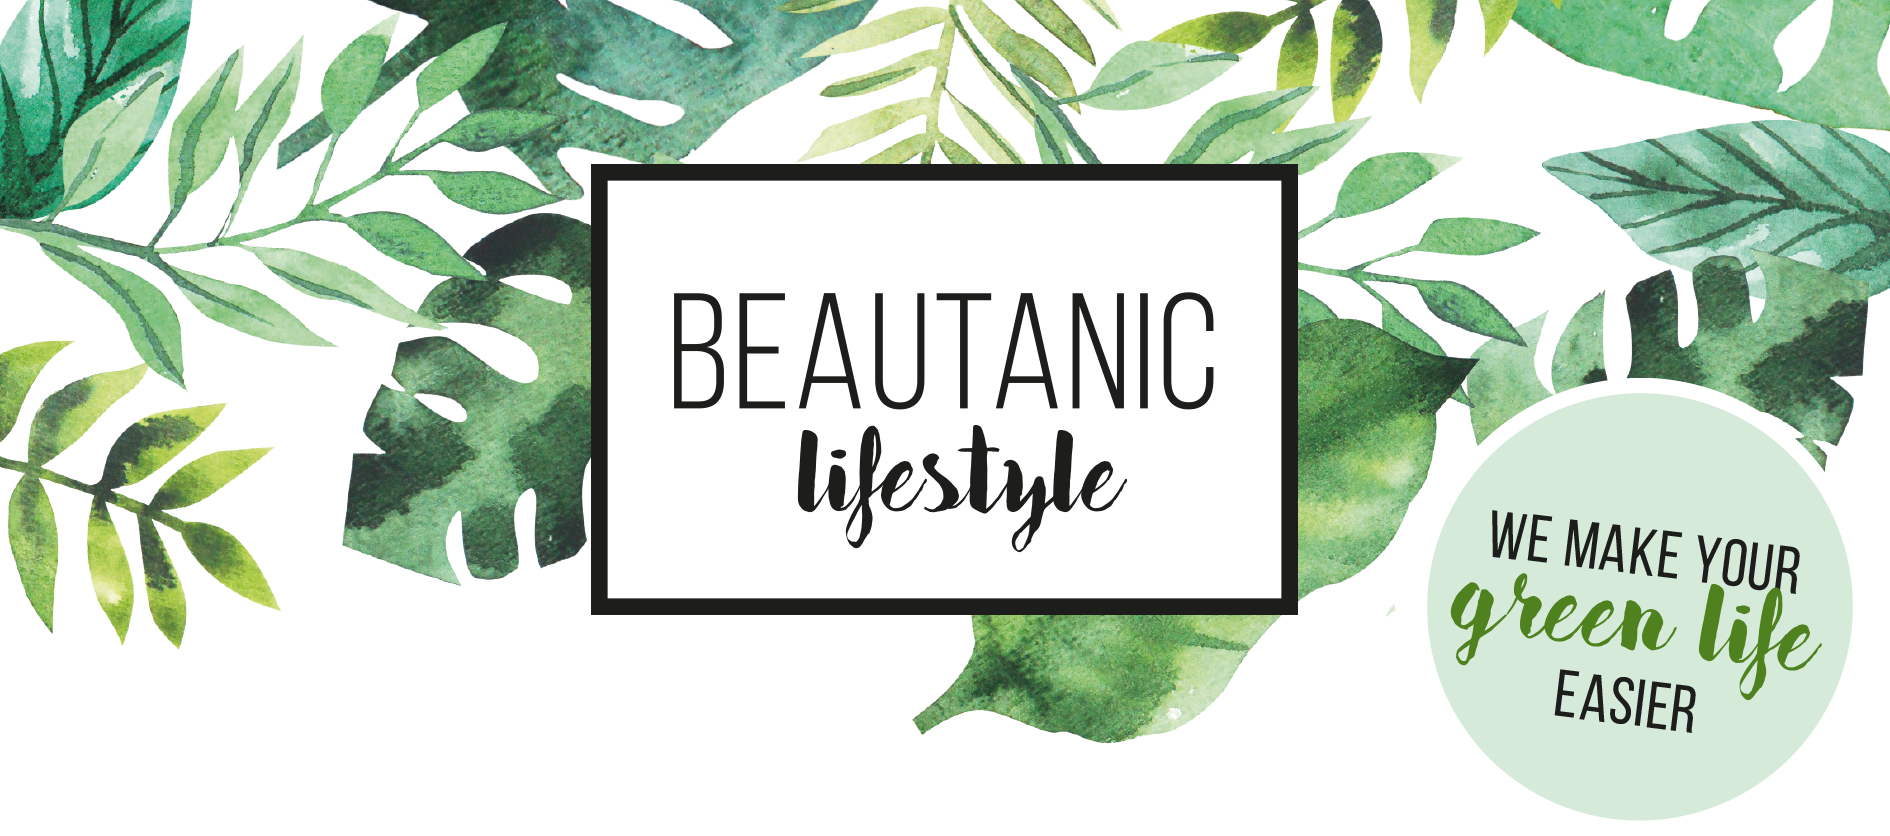 Load video: Video about benefits of Beautanic Lifestyle